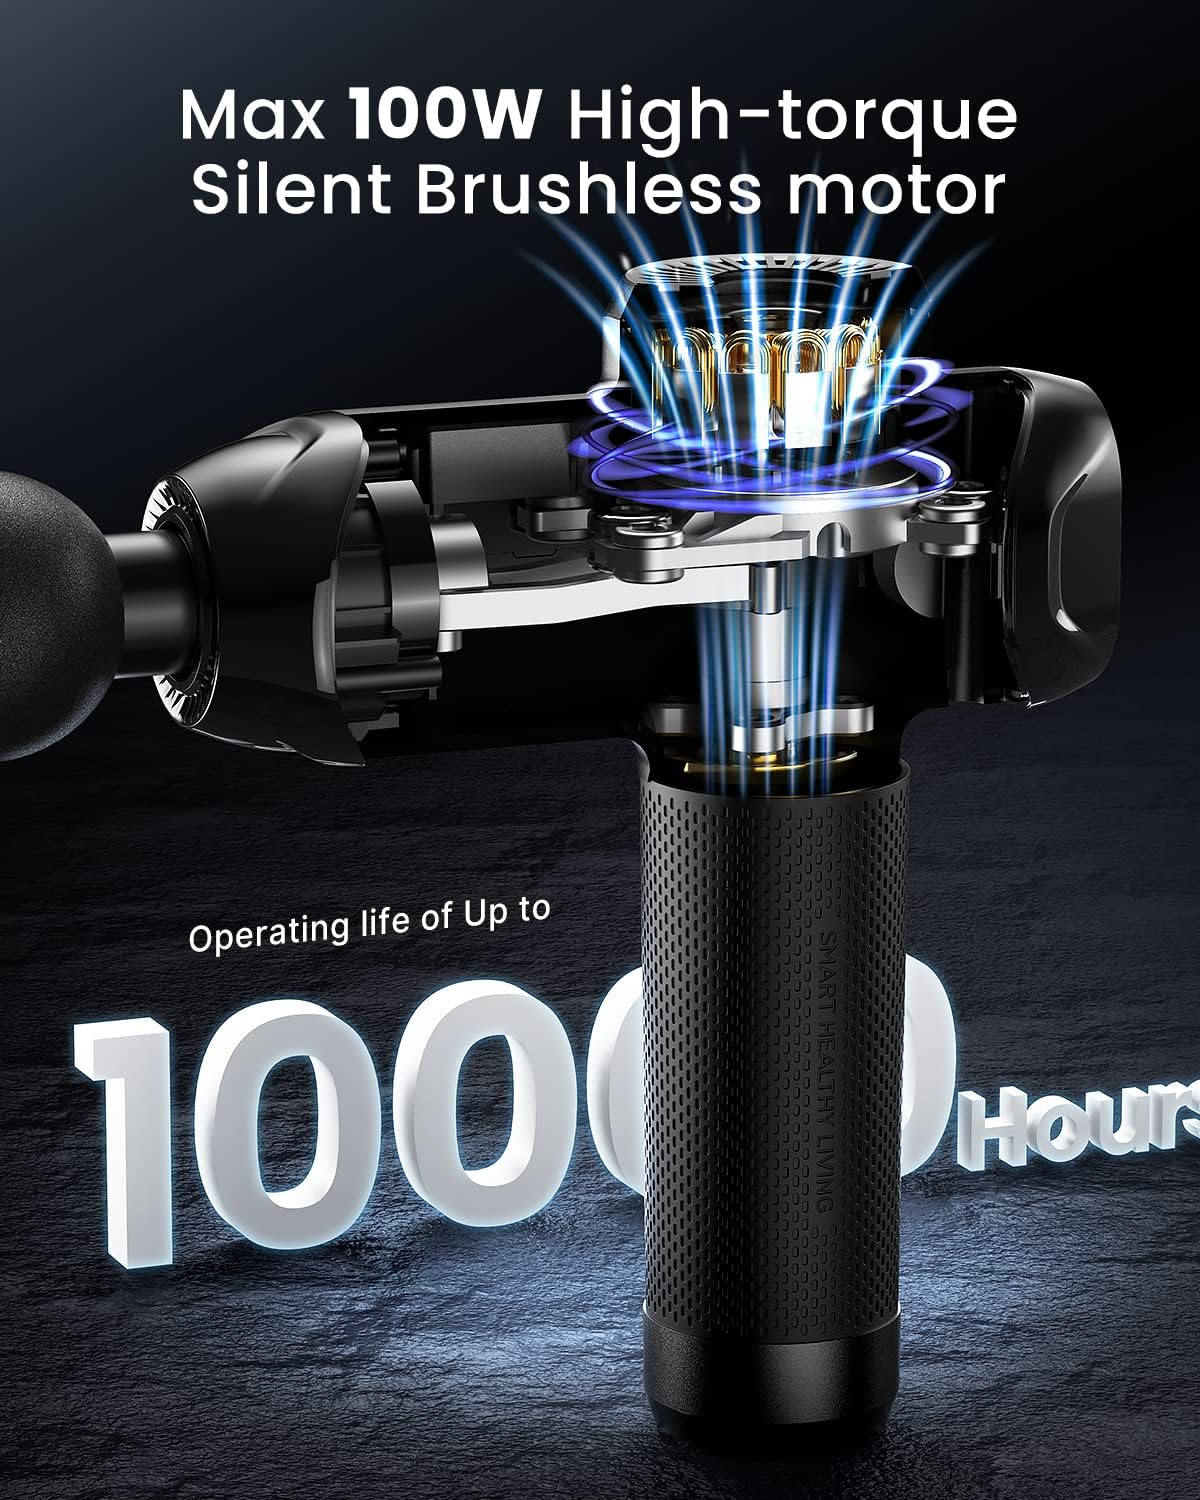 Illustration of a Power Massage Gun, a high-torque, silent, brushless motor with a digital display indicating a 1000-hour operating life, emphasized in a sleek, modern design for fitness massagers.